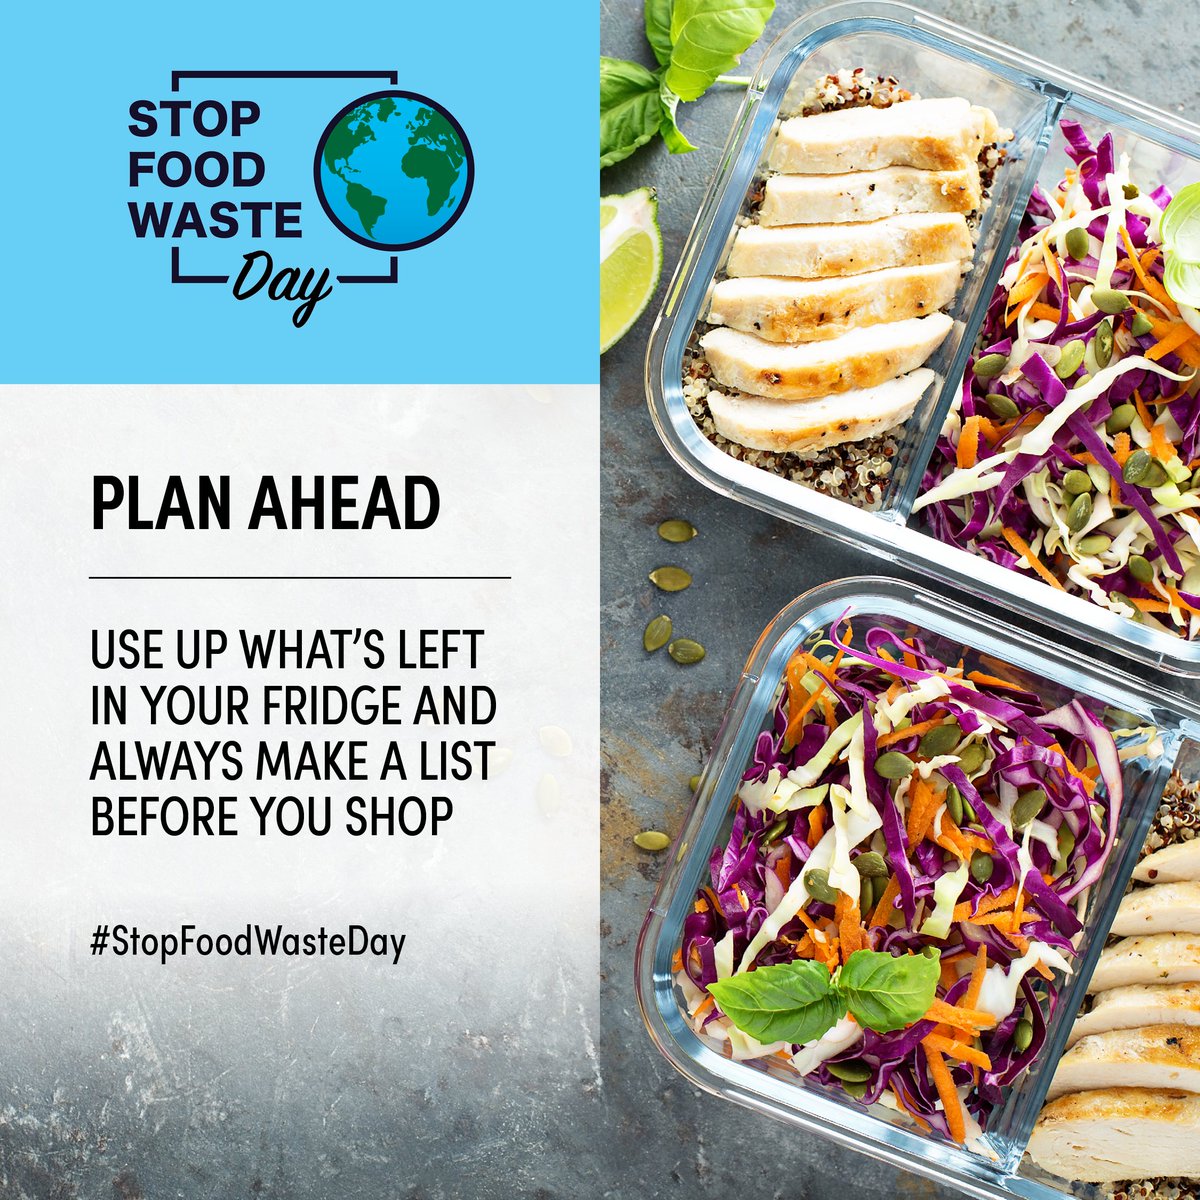 Today is the largest single day of action in the fight against food waste: @StopFoodWasteDay!
Did you know that globally, one third of all food produced for human consumption is lost or wasted? 

#StopFoodWasteDay #Sustainability #PreventInspireRepurpose #FightAgainstFoodWaste